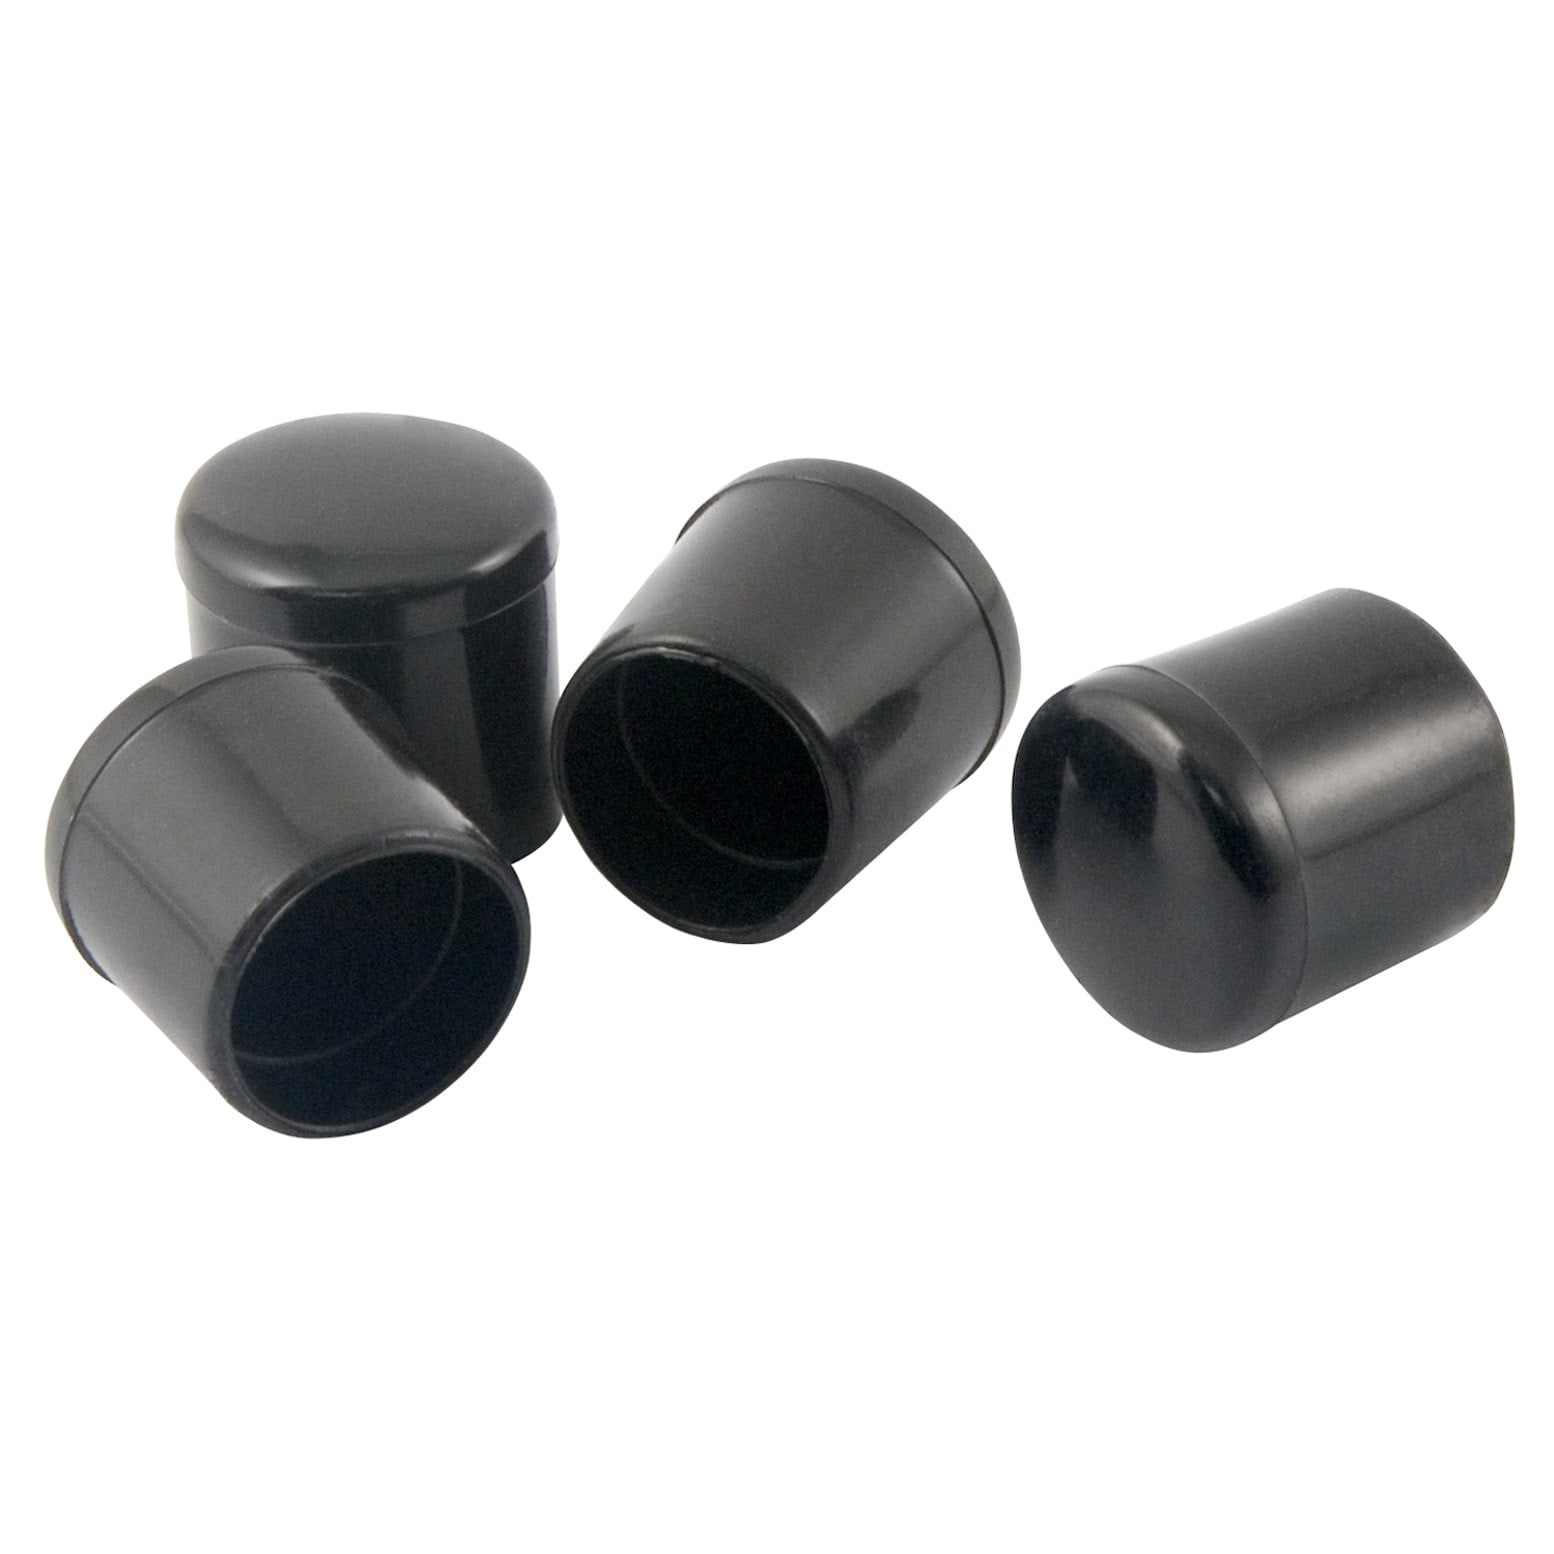 1/2" SoftTouch Rubber Leg Tip - 4 pieces Black 